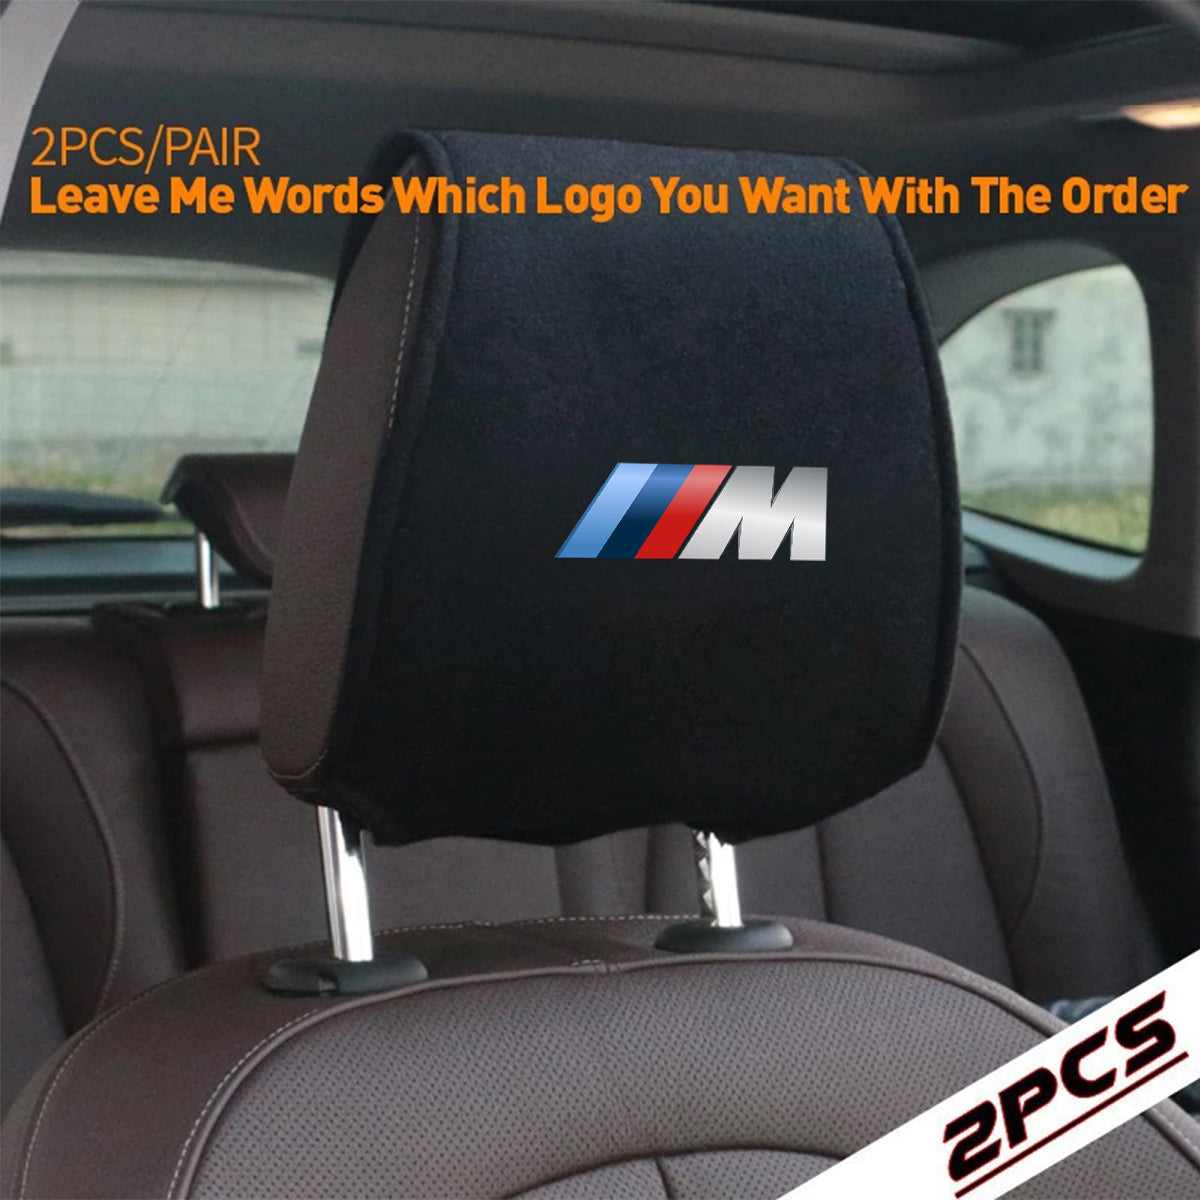 Stylish BMW M Sport Car Seat Headrest Cover: Personalize & Protect